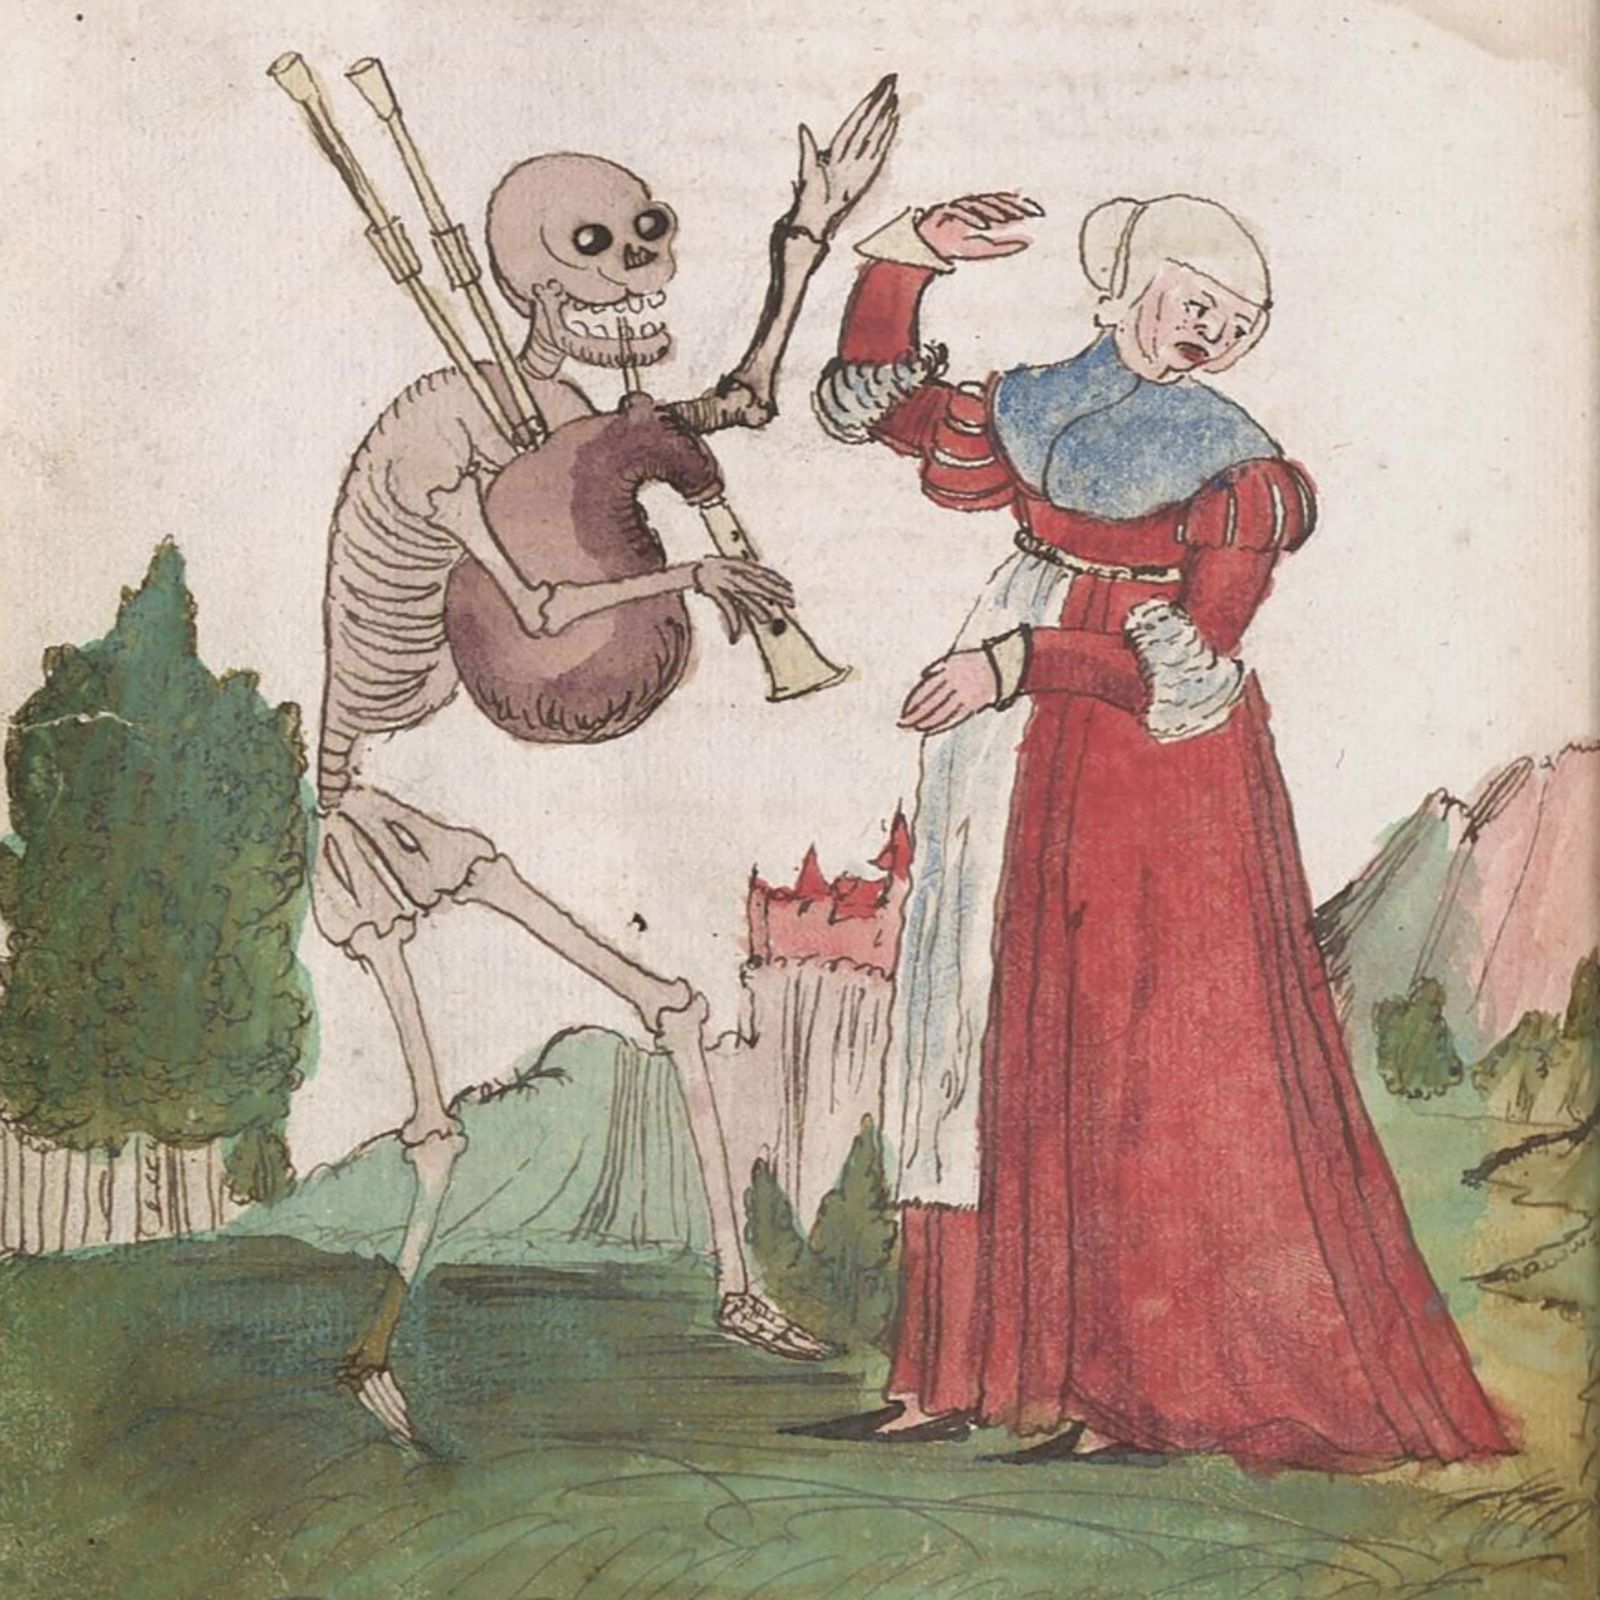 "Bagpipes? No thank you. Send a skeleton who knows how to play something nicer, please." This illustration is part of the Danse Macabre motif, in which the grim reaper takes the dead on a musical journey to the afterlife.